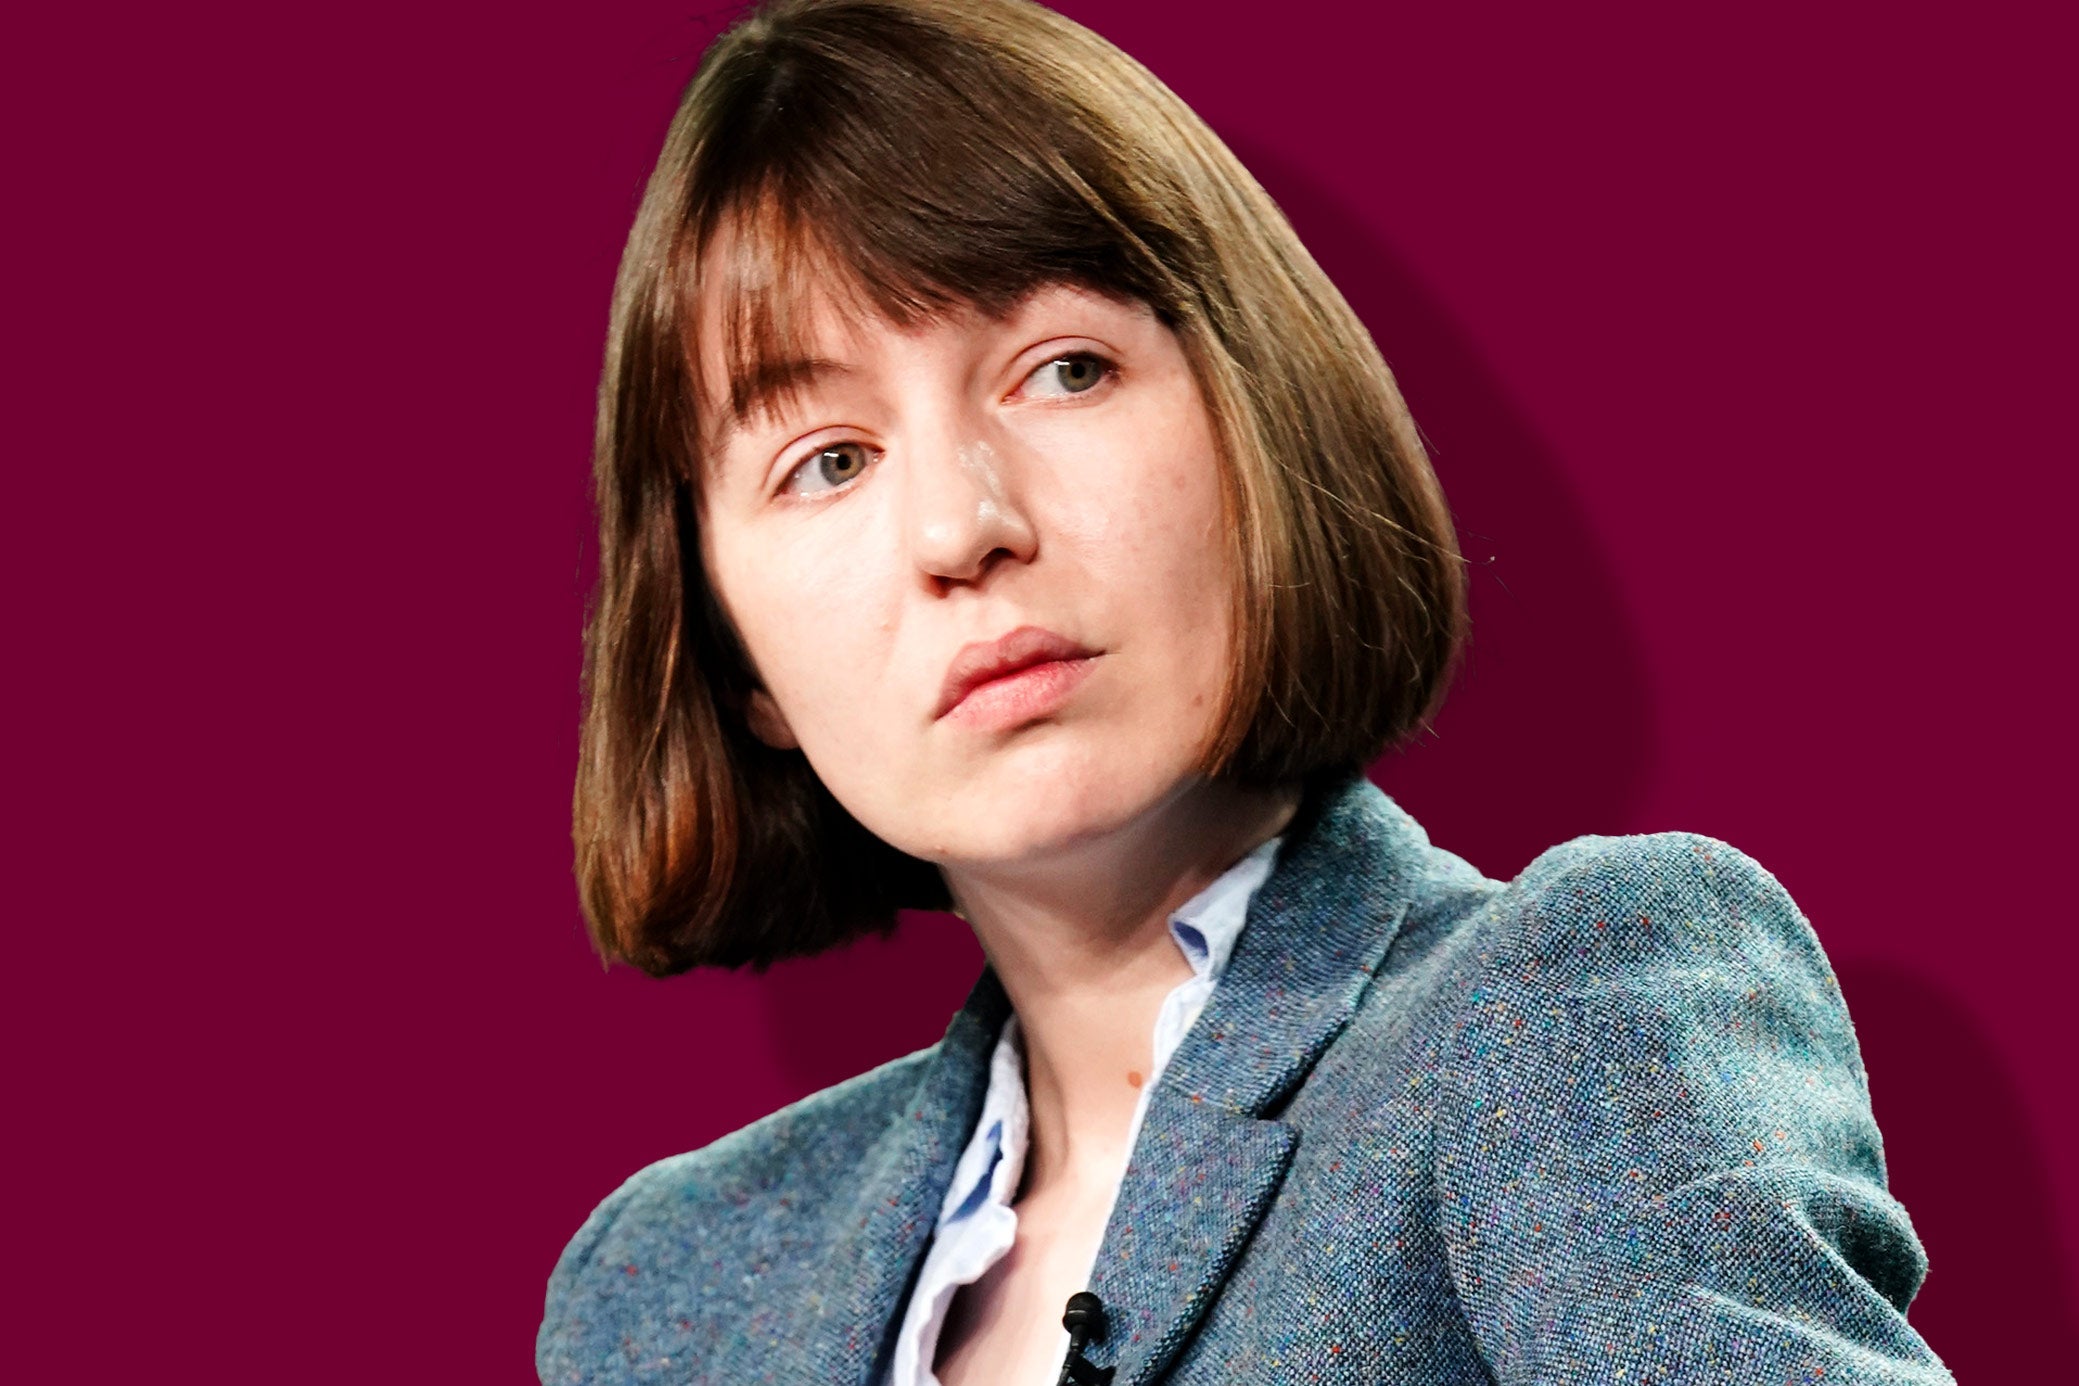 Sally Rooney in a bob haircut and a blazer, casting a sideward glance at someone off camera